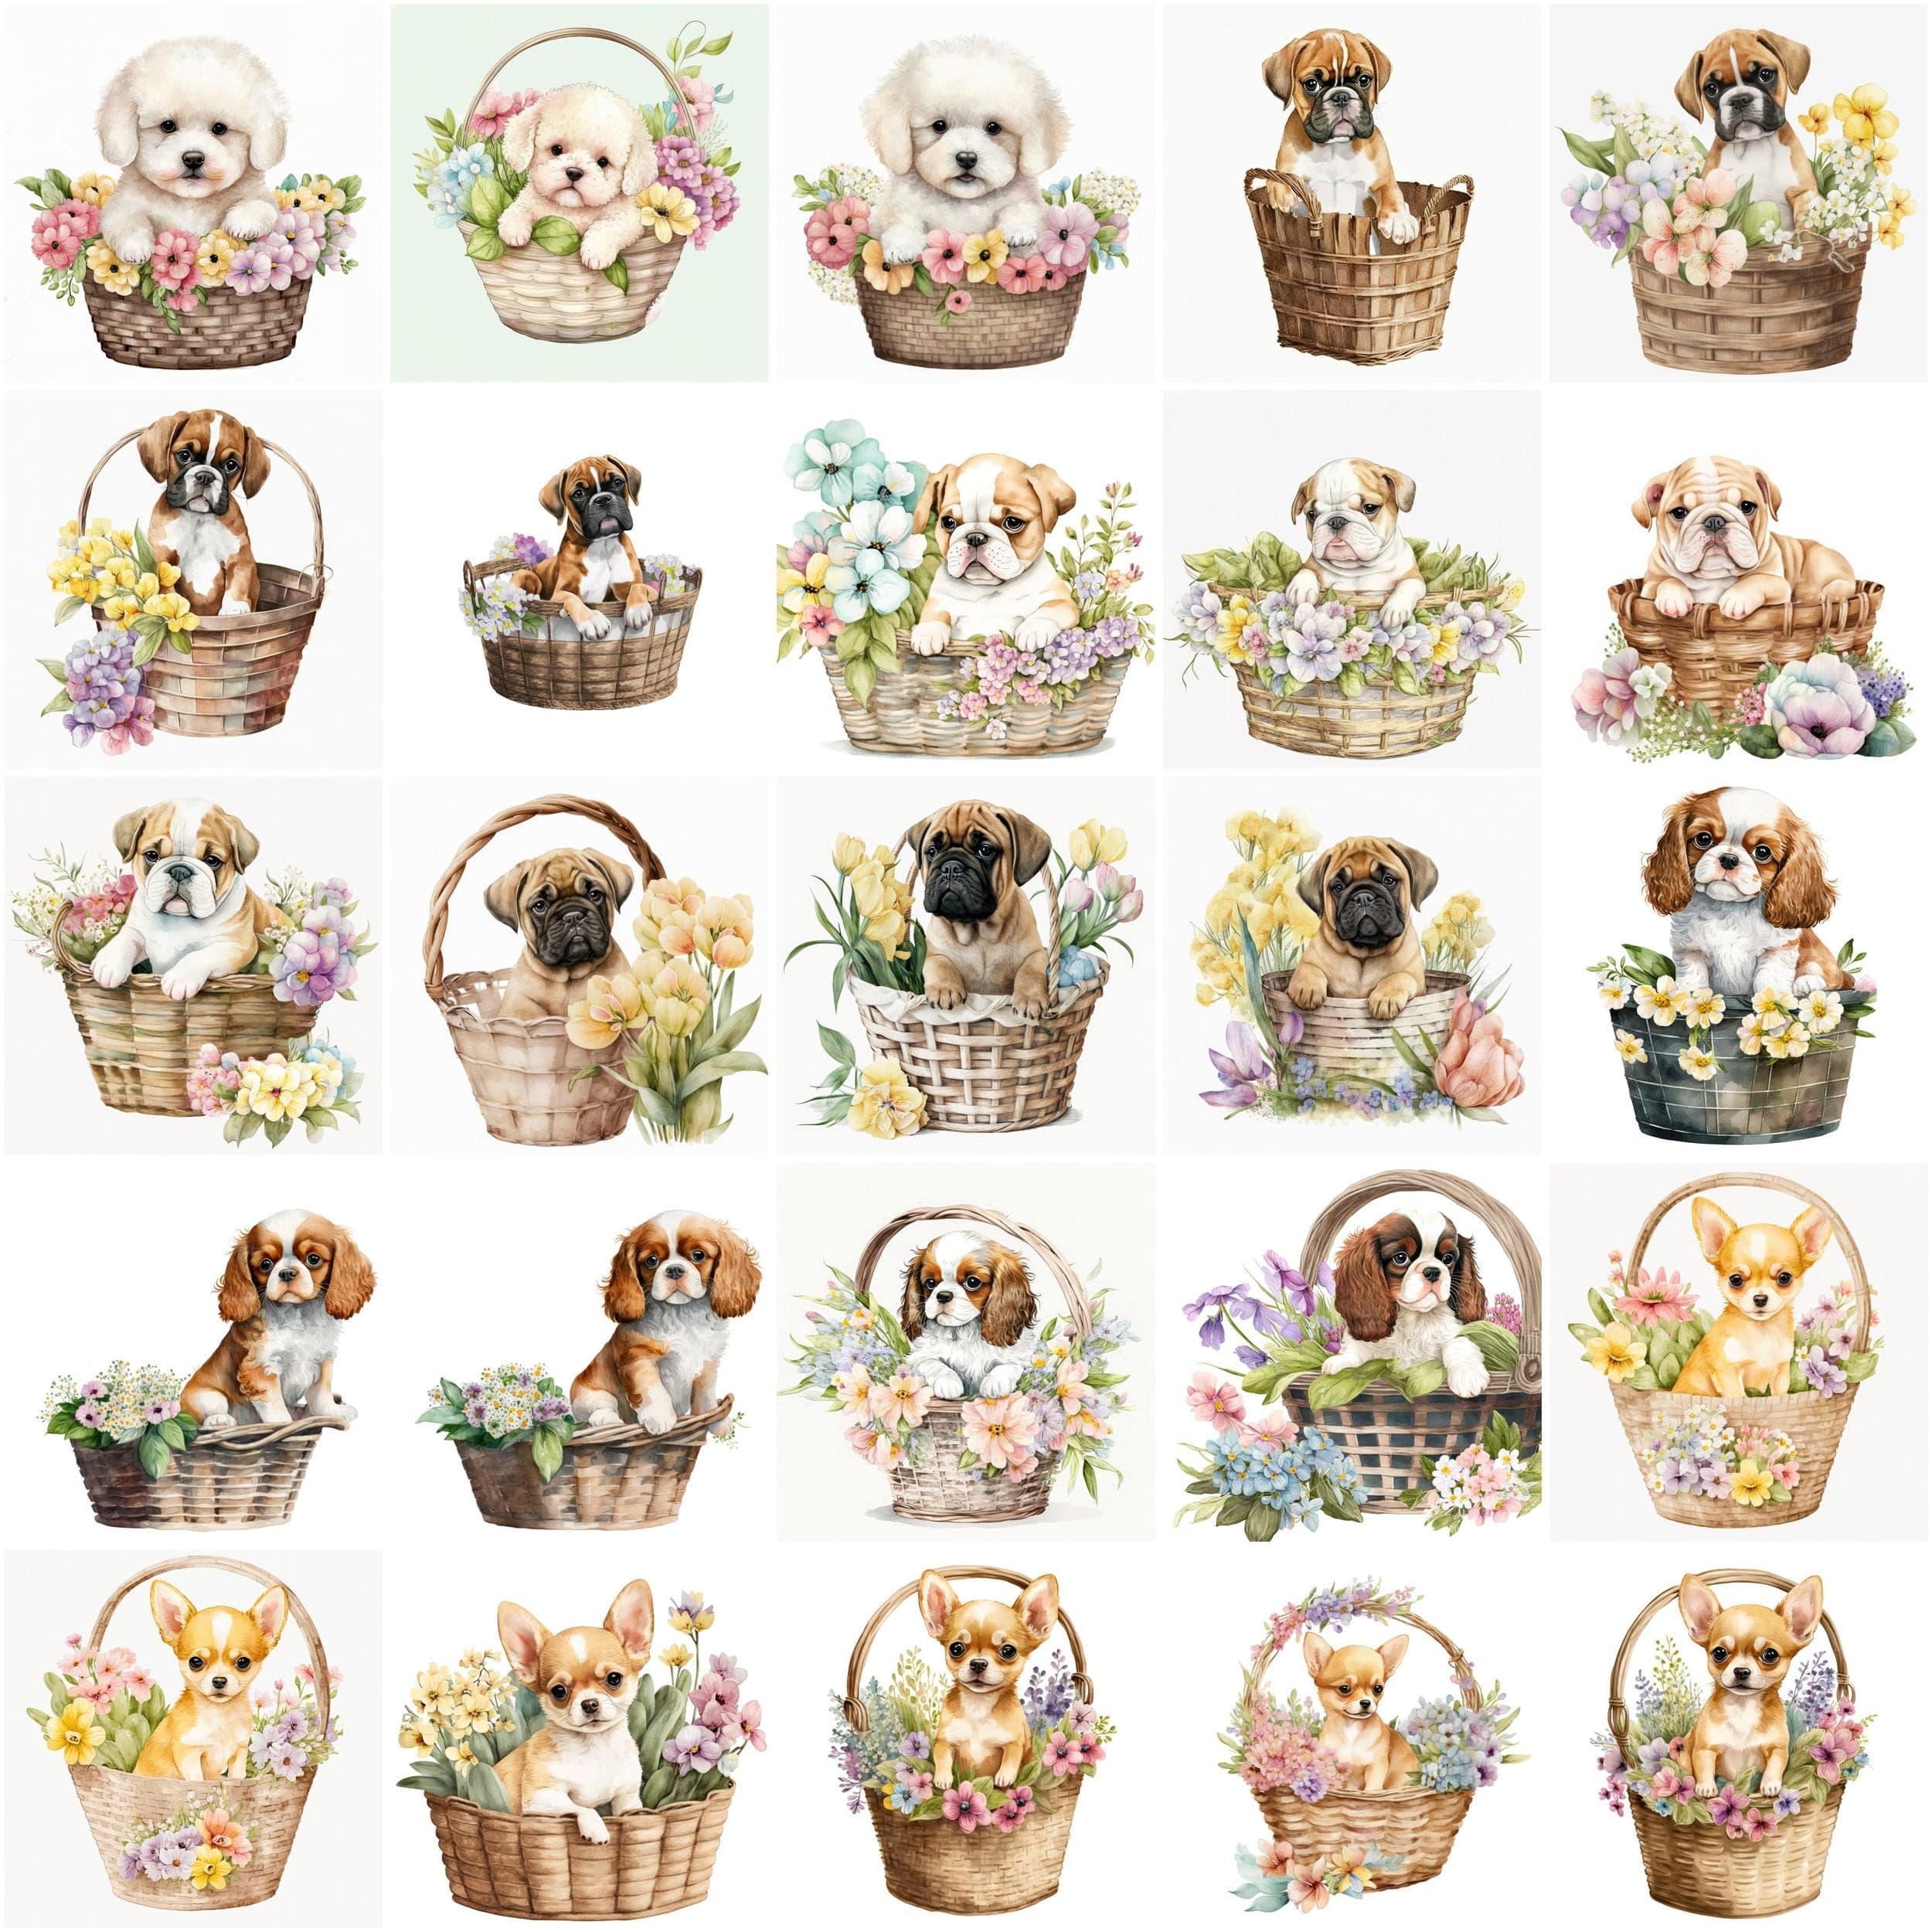 Fall in Love with These Watercolour Transparent 115 Baby Puppies in Basket Clipart, Perfect for Creating Whimsical Designs - Commercial Use Digital Download Sumobundle